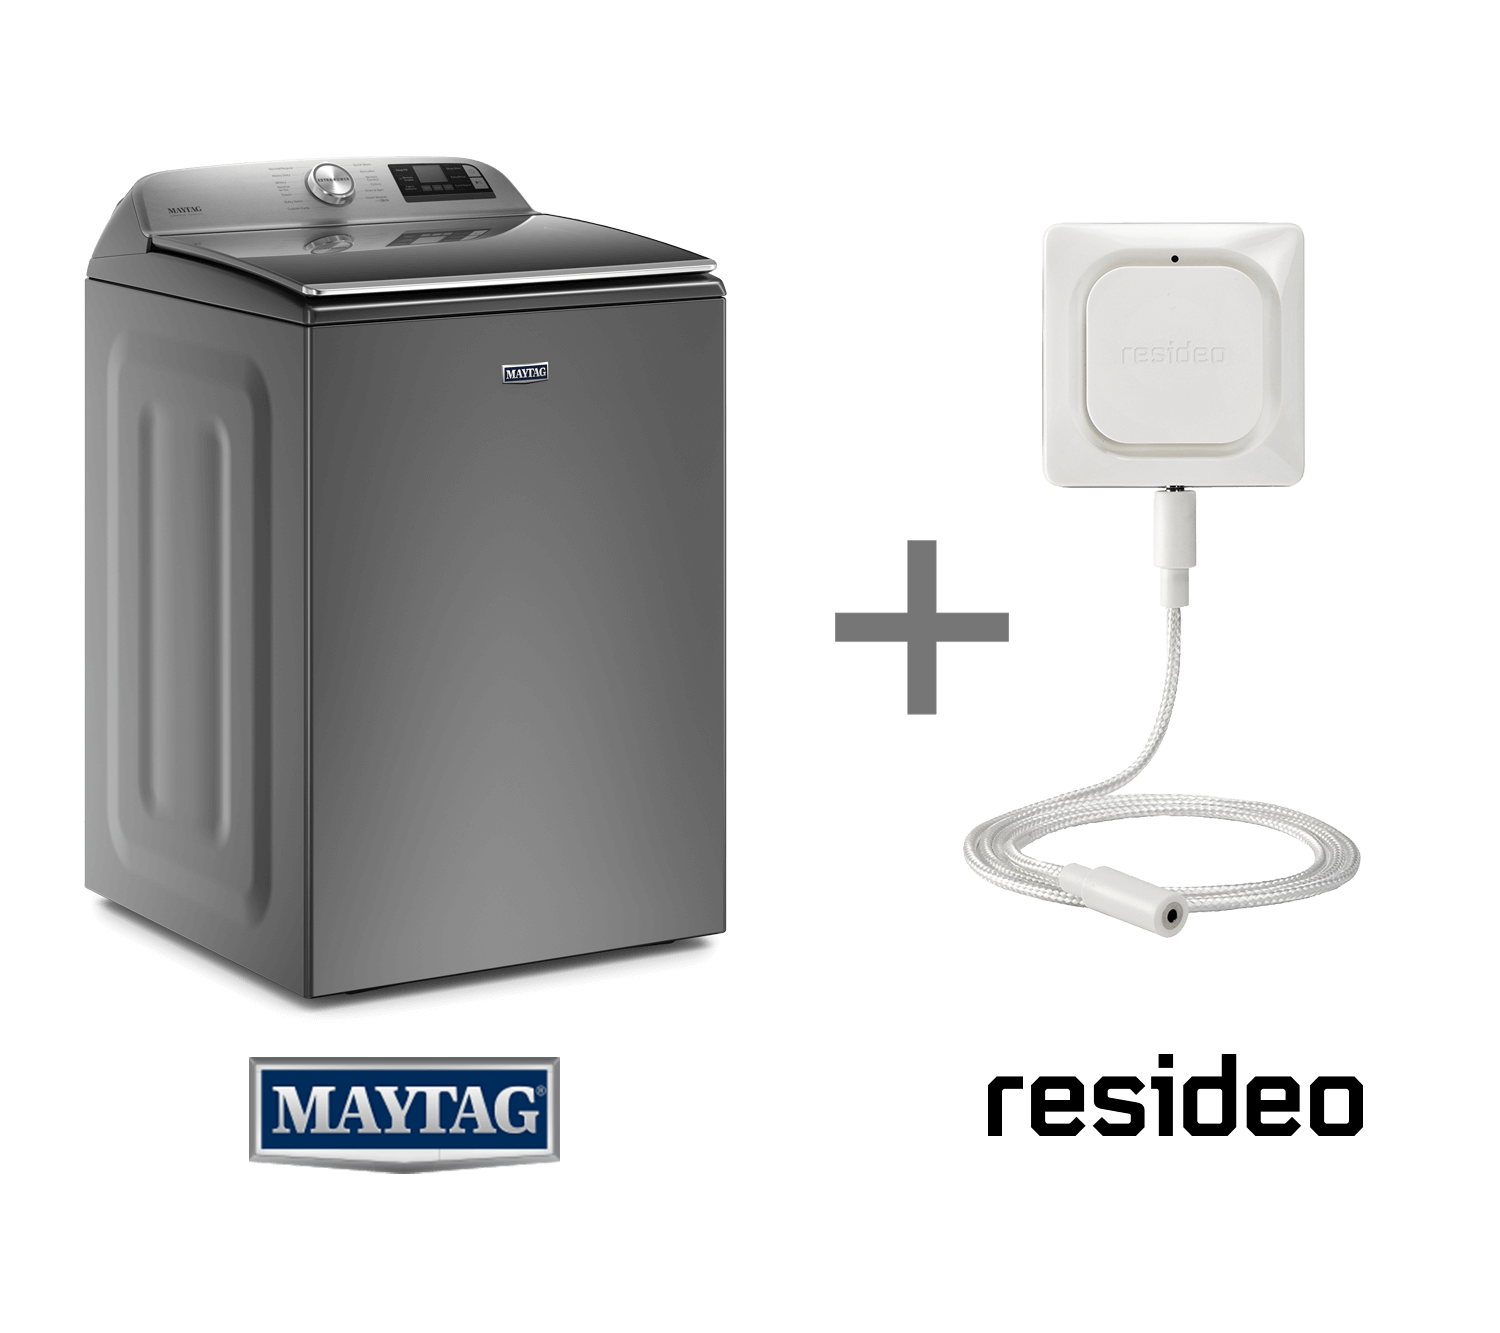 A Maytag washer and a Resideo water leak detector.